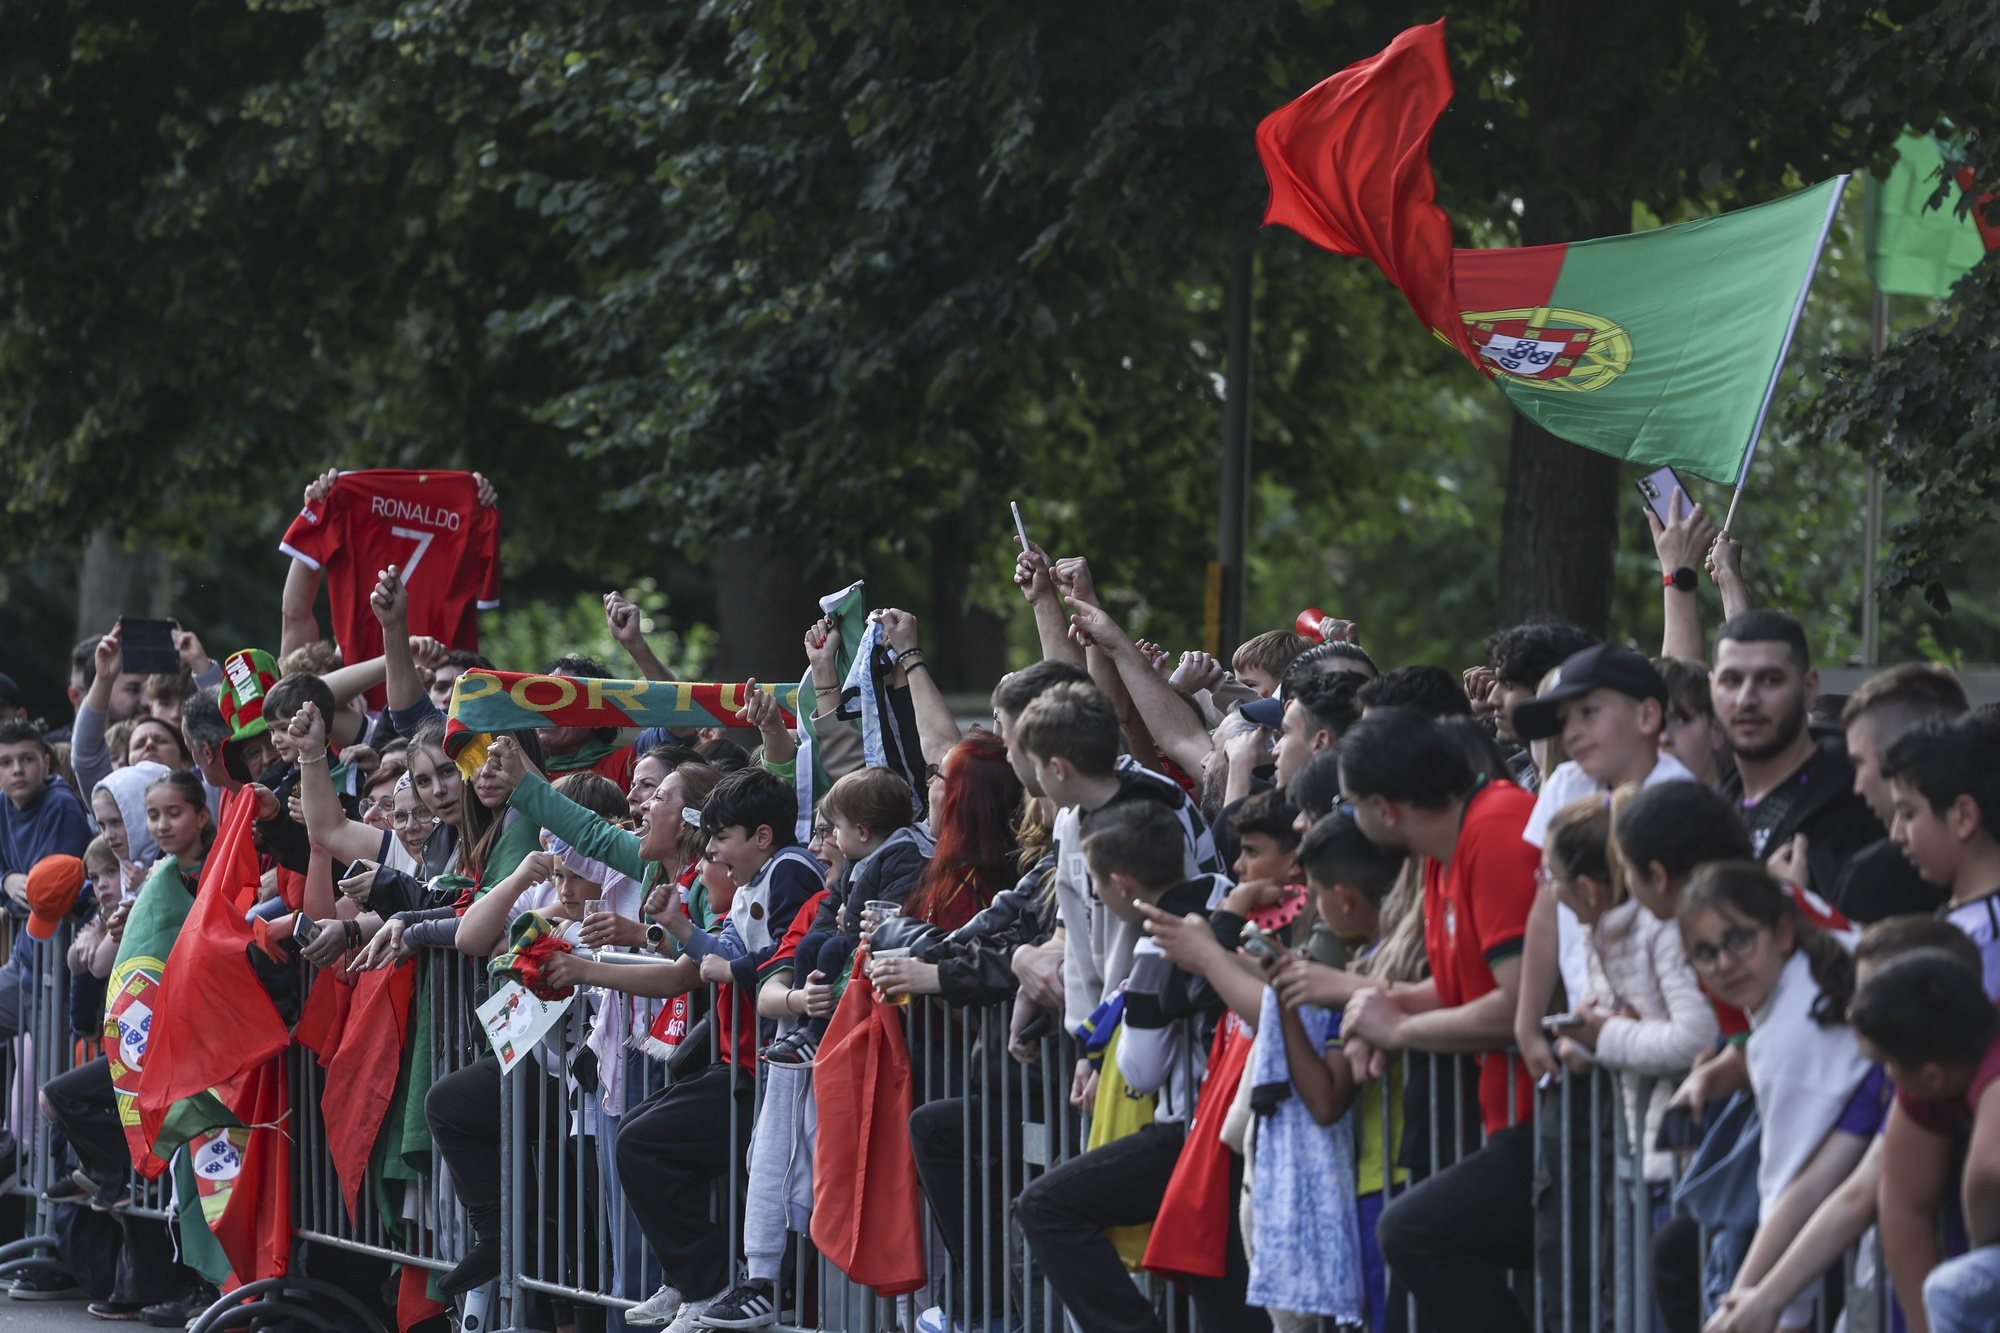 Portugal Fans wait for Portugal national soccer team arrival to Harsewinkel, Germany, 13 June 2024. The Portuguese national soccer team is based in Harsewinkel during the UEFA EURO 2024. MIGUEL A. LOPES/LUSA